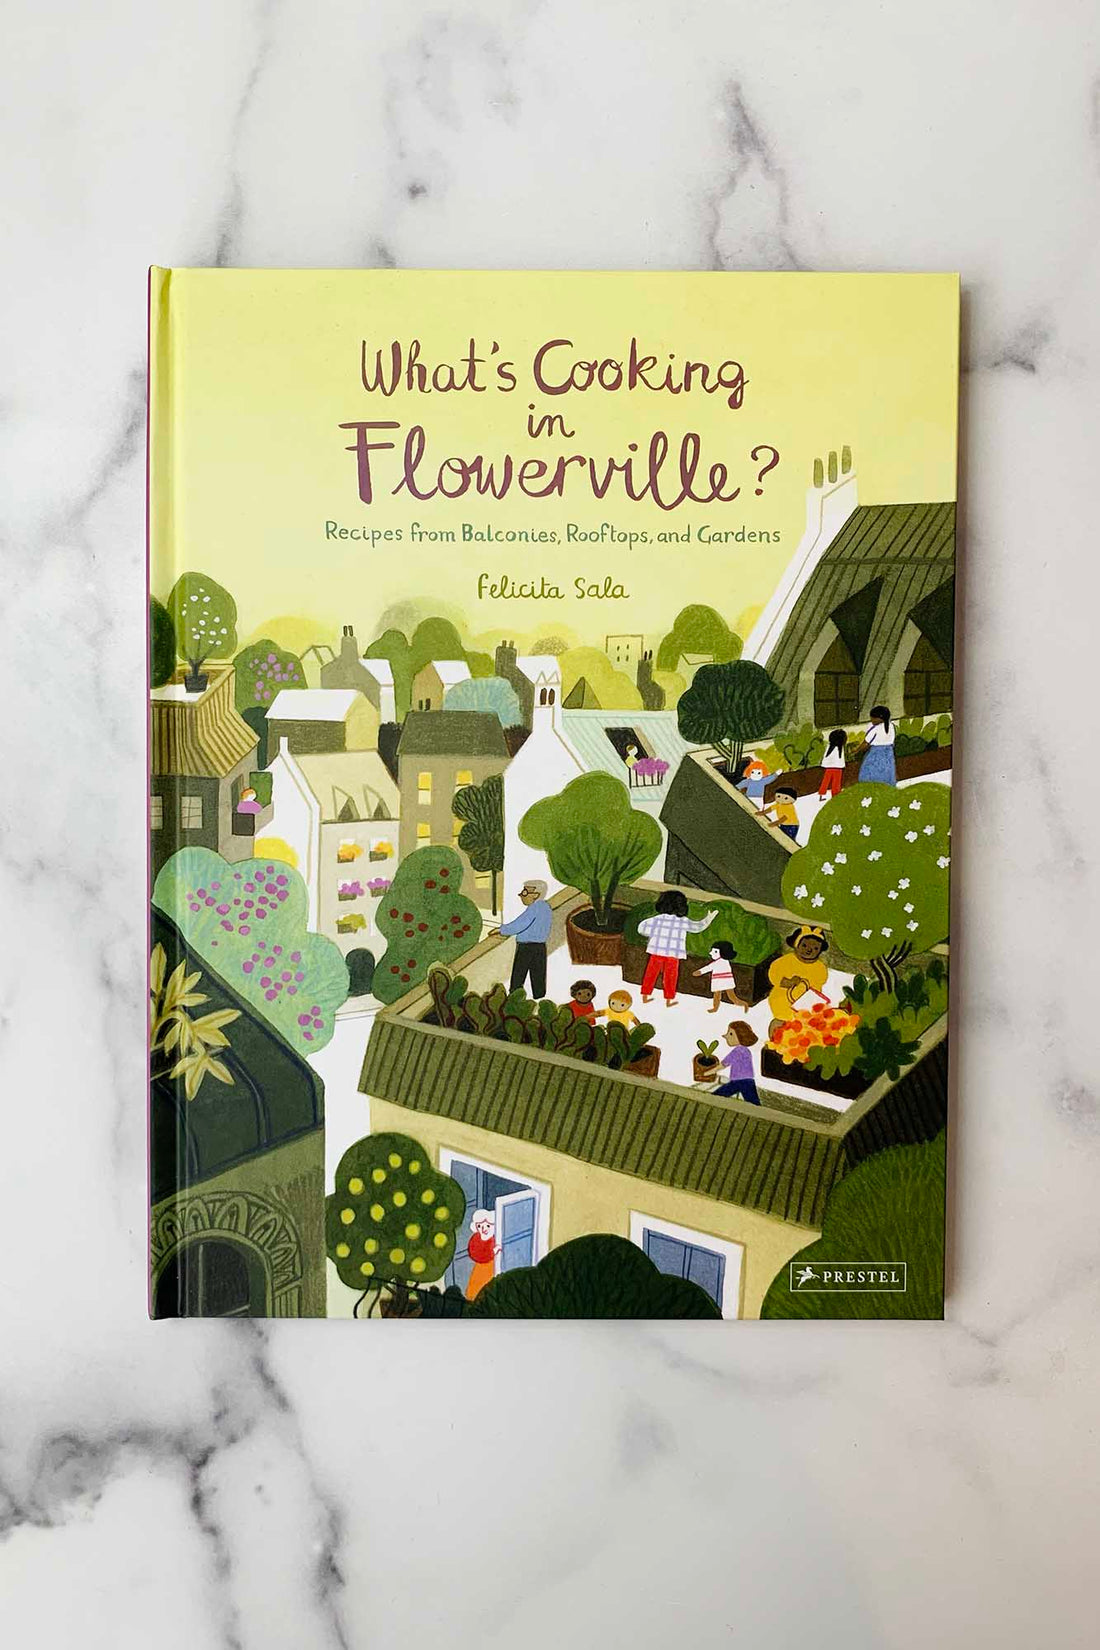 What's Cooking in Flowerville?